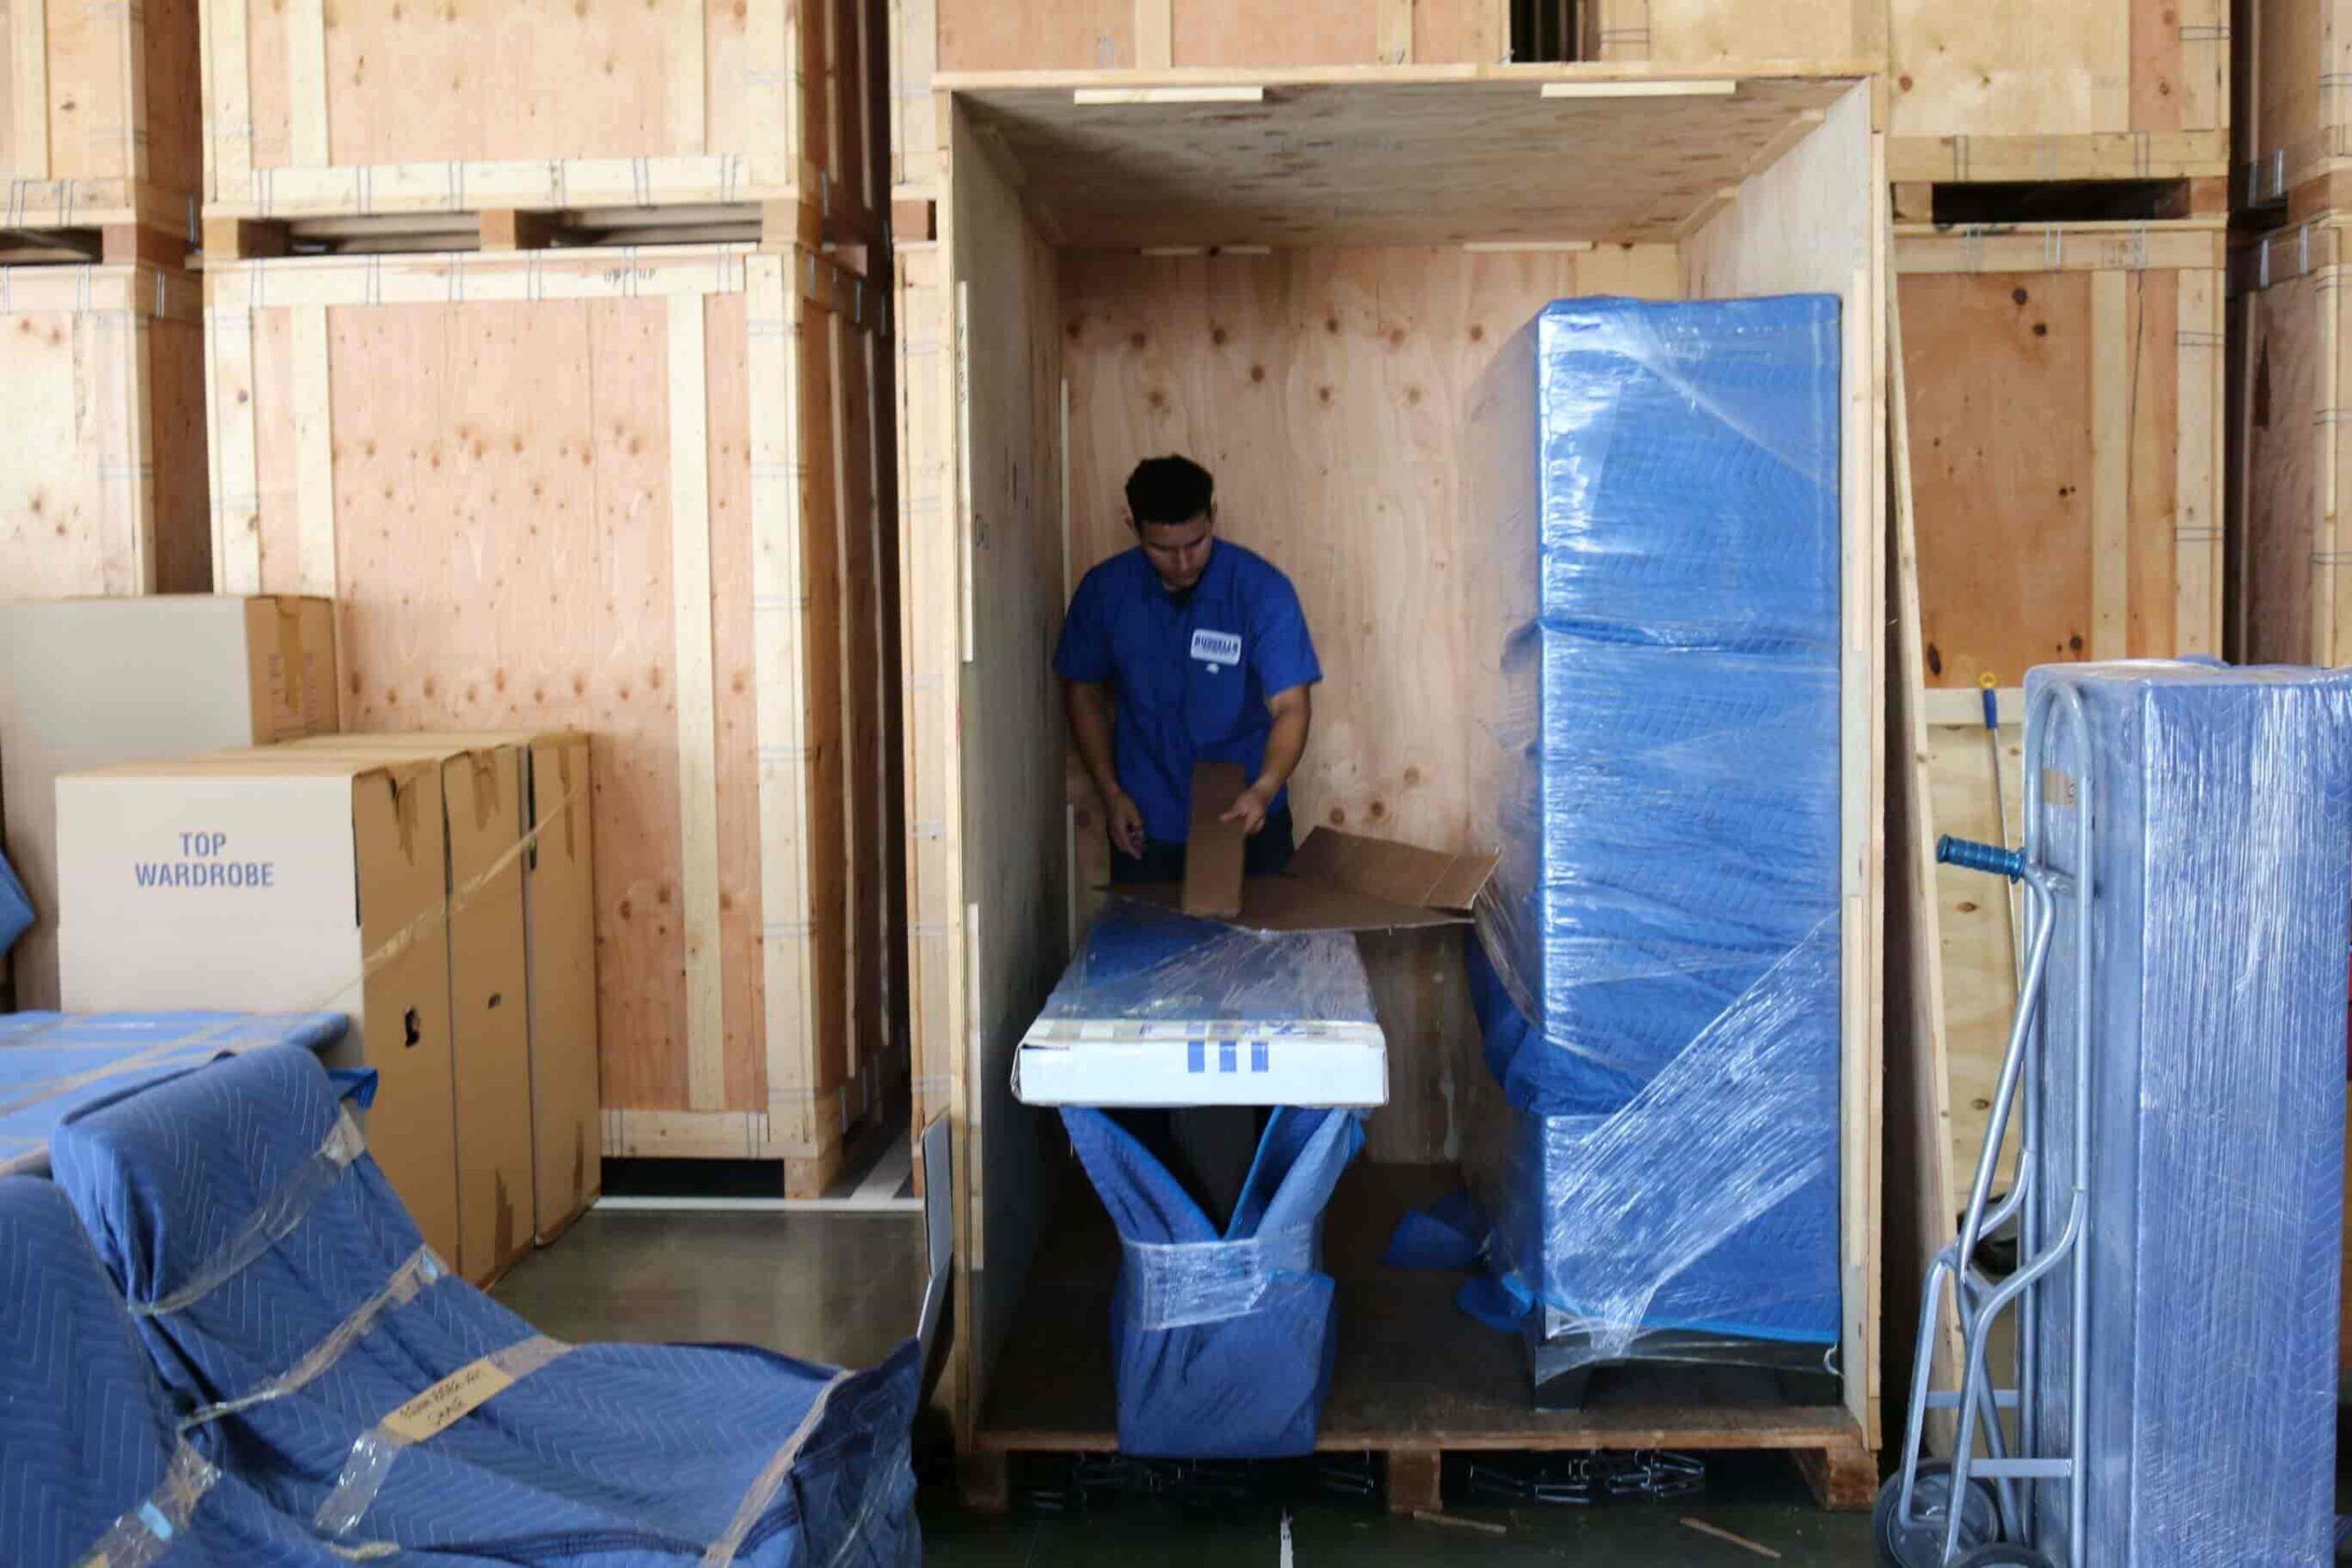 moving and storage companies